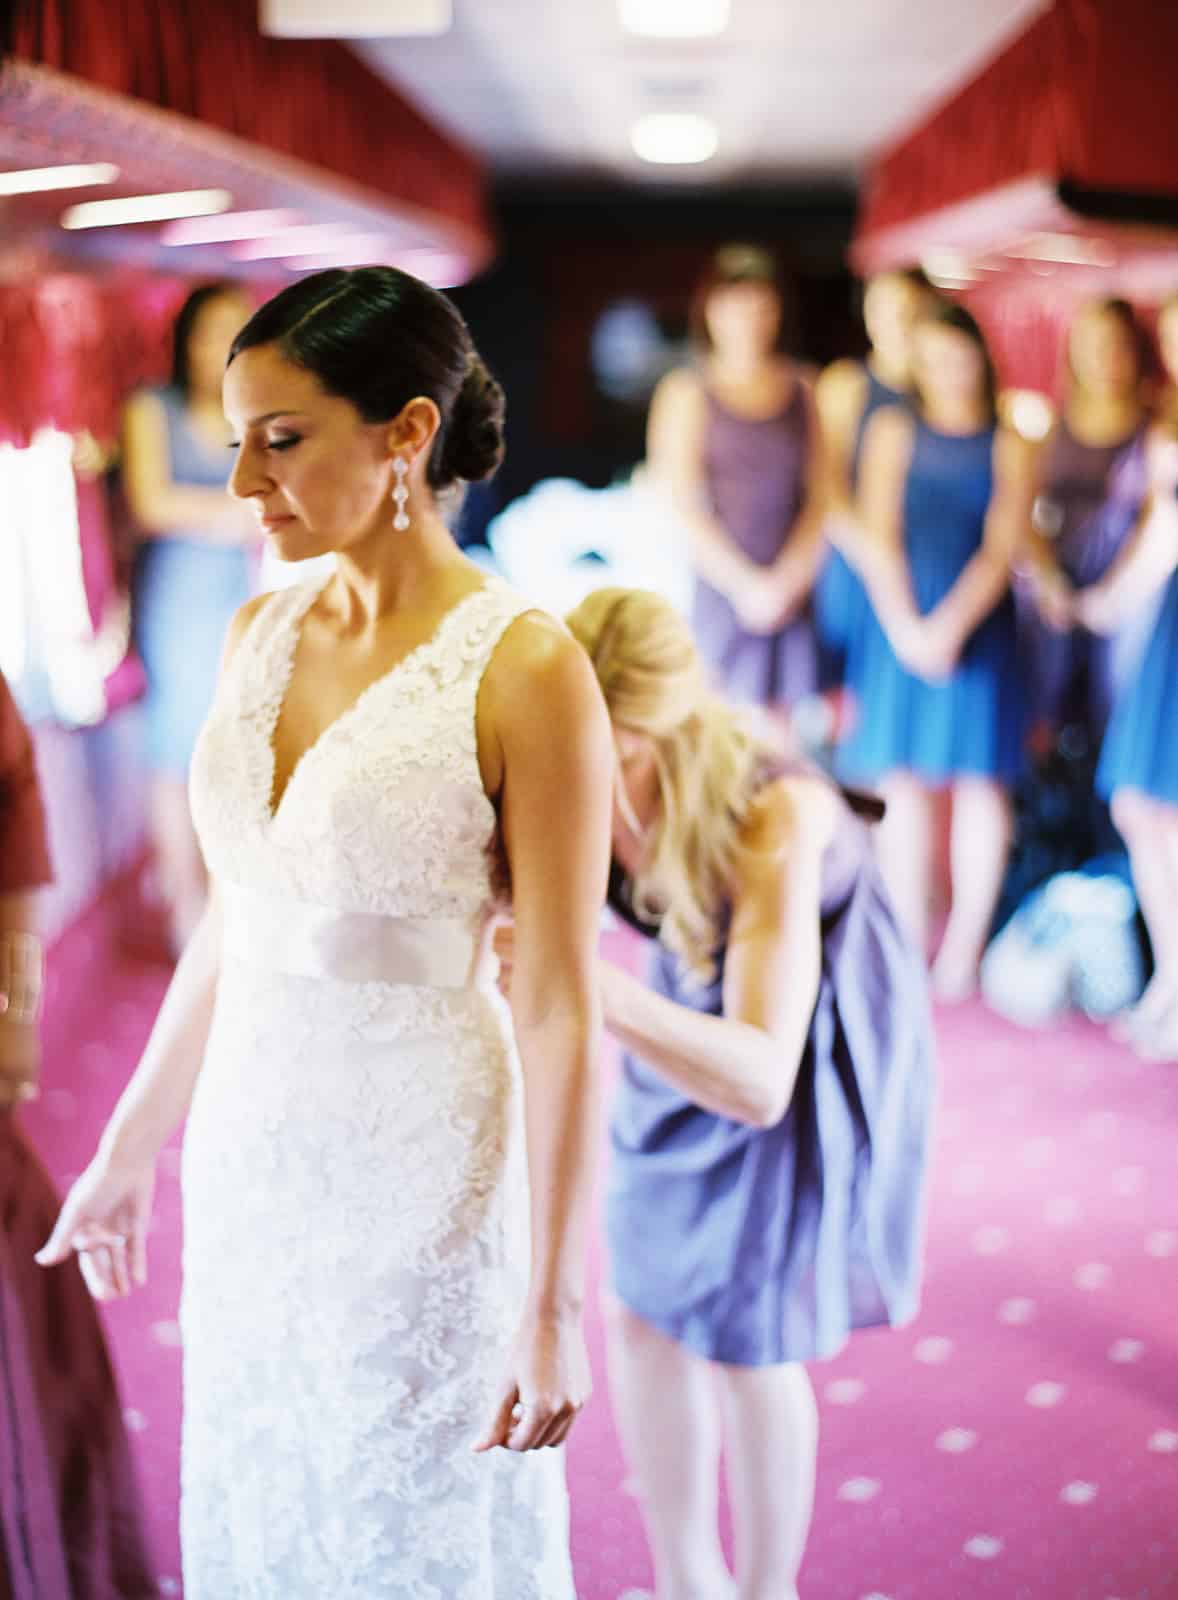 Bride and bridesmaids getting ready inside a train